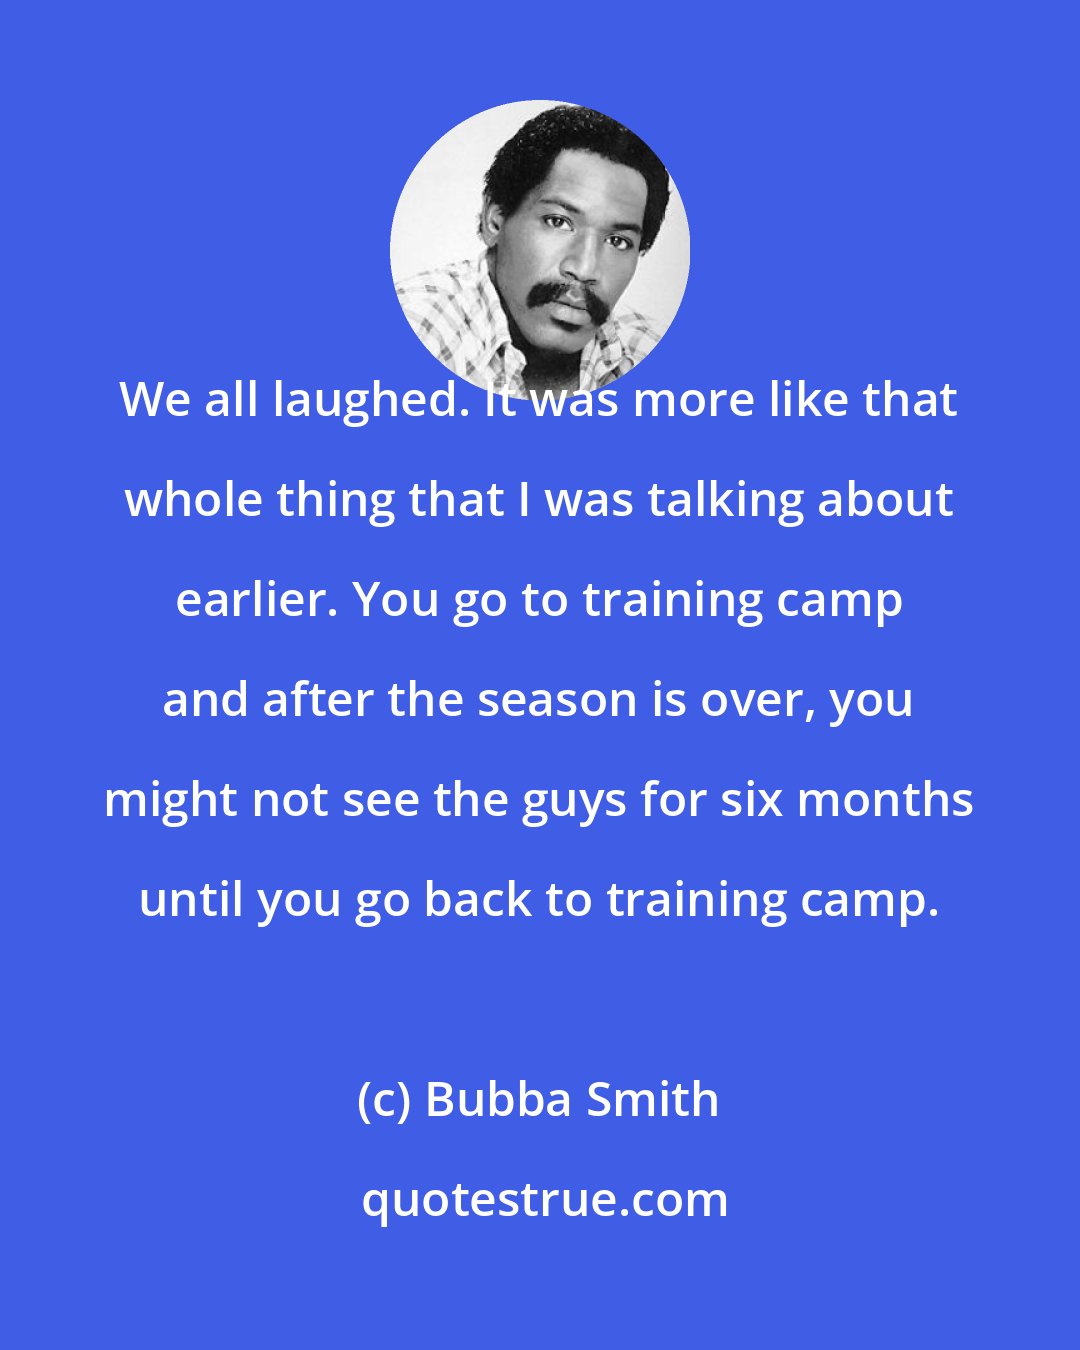 Bubba Smith: We all laughed. It was more like that whole thing that I was talking about earlier. You go to training camp and after the season is over, you might not see the guys for six months until you go back to training camp.